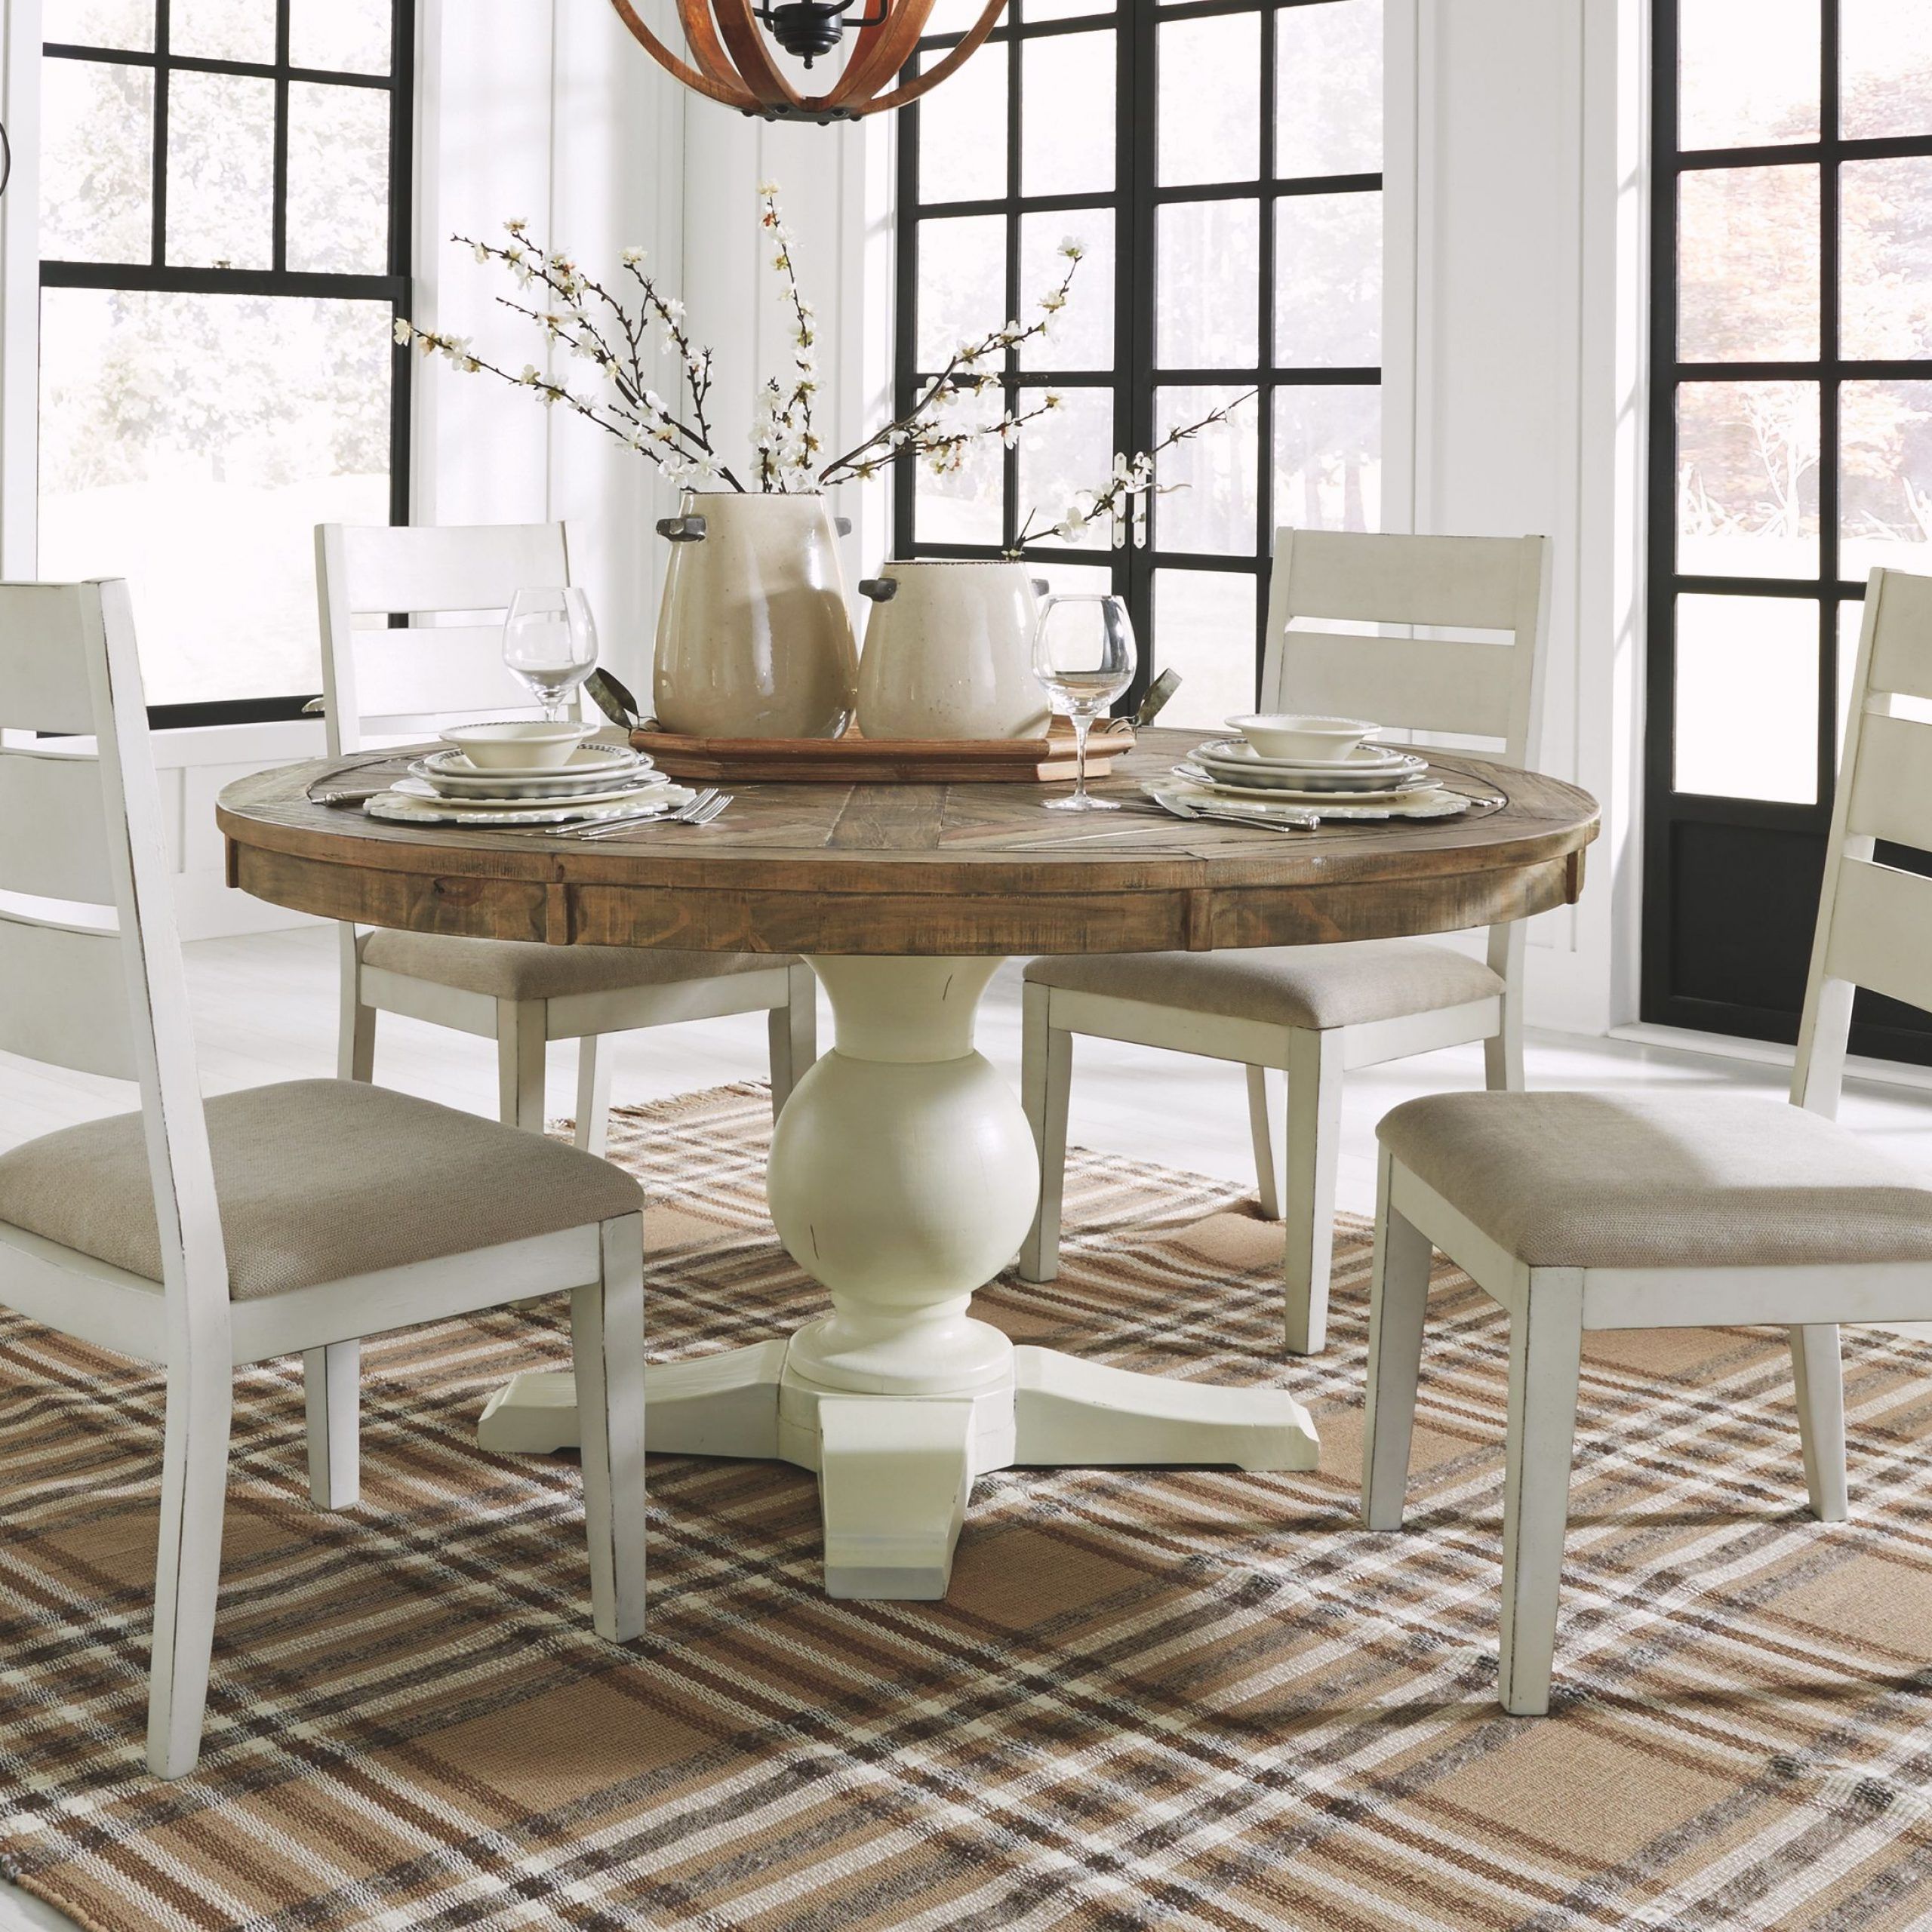 Grindleburg 5 Piece Dining Room, White/light Brown In 2020 Regarding Most Recently Released Light Brown Round Dining Tables (Gallery 19 of 20)